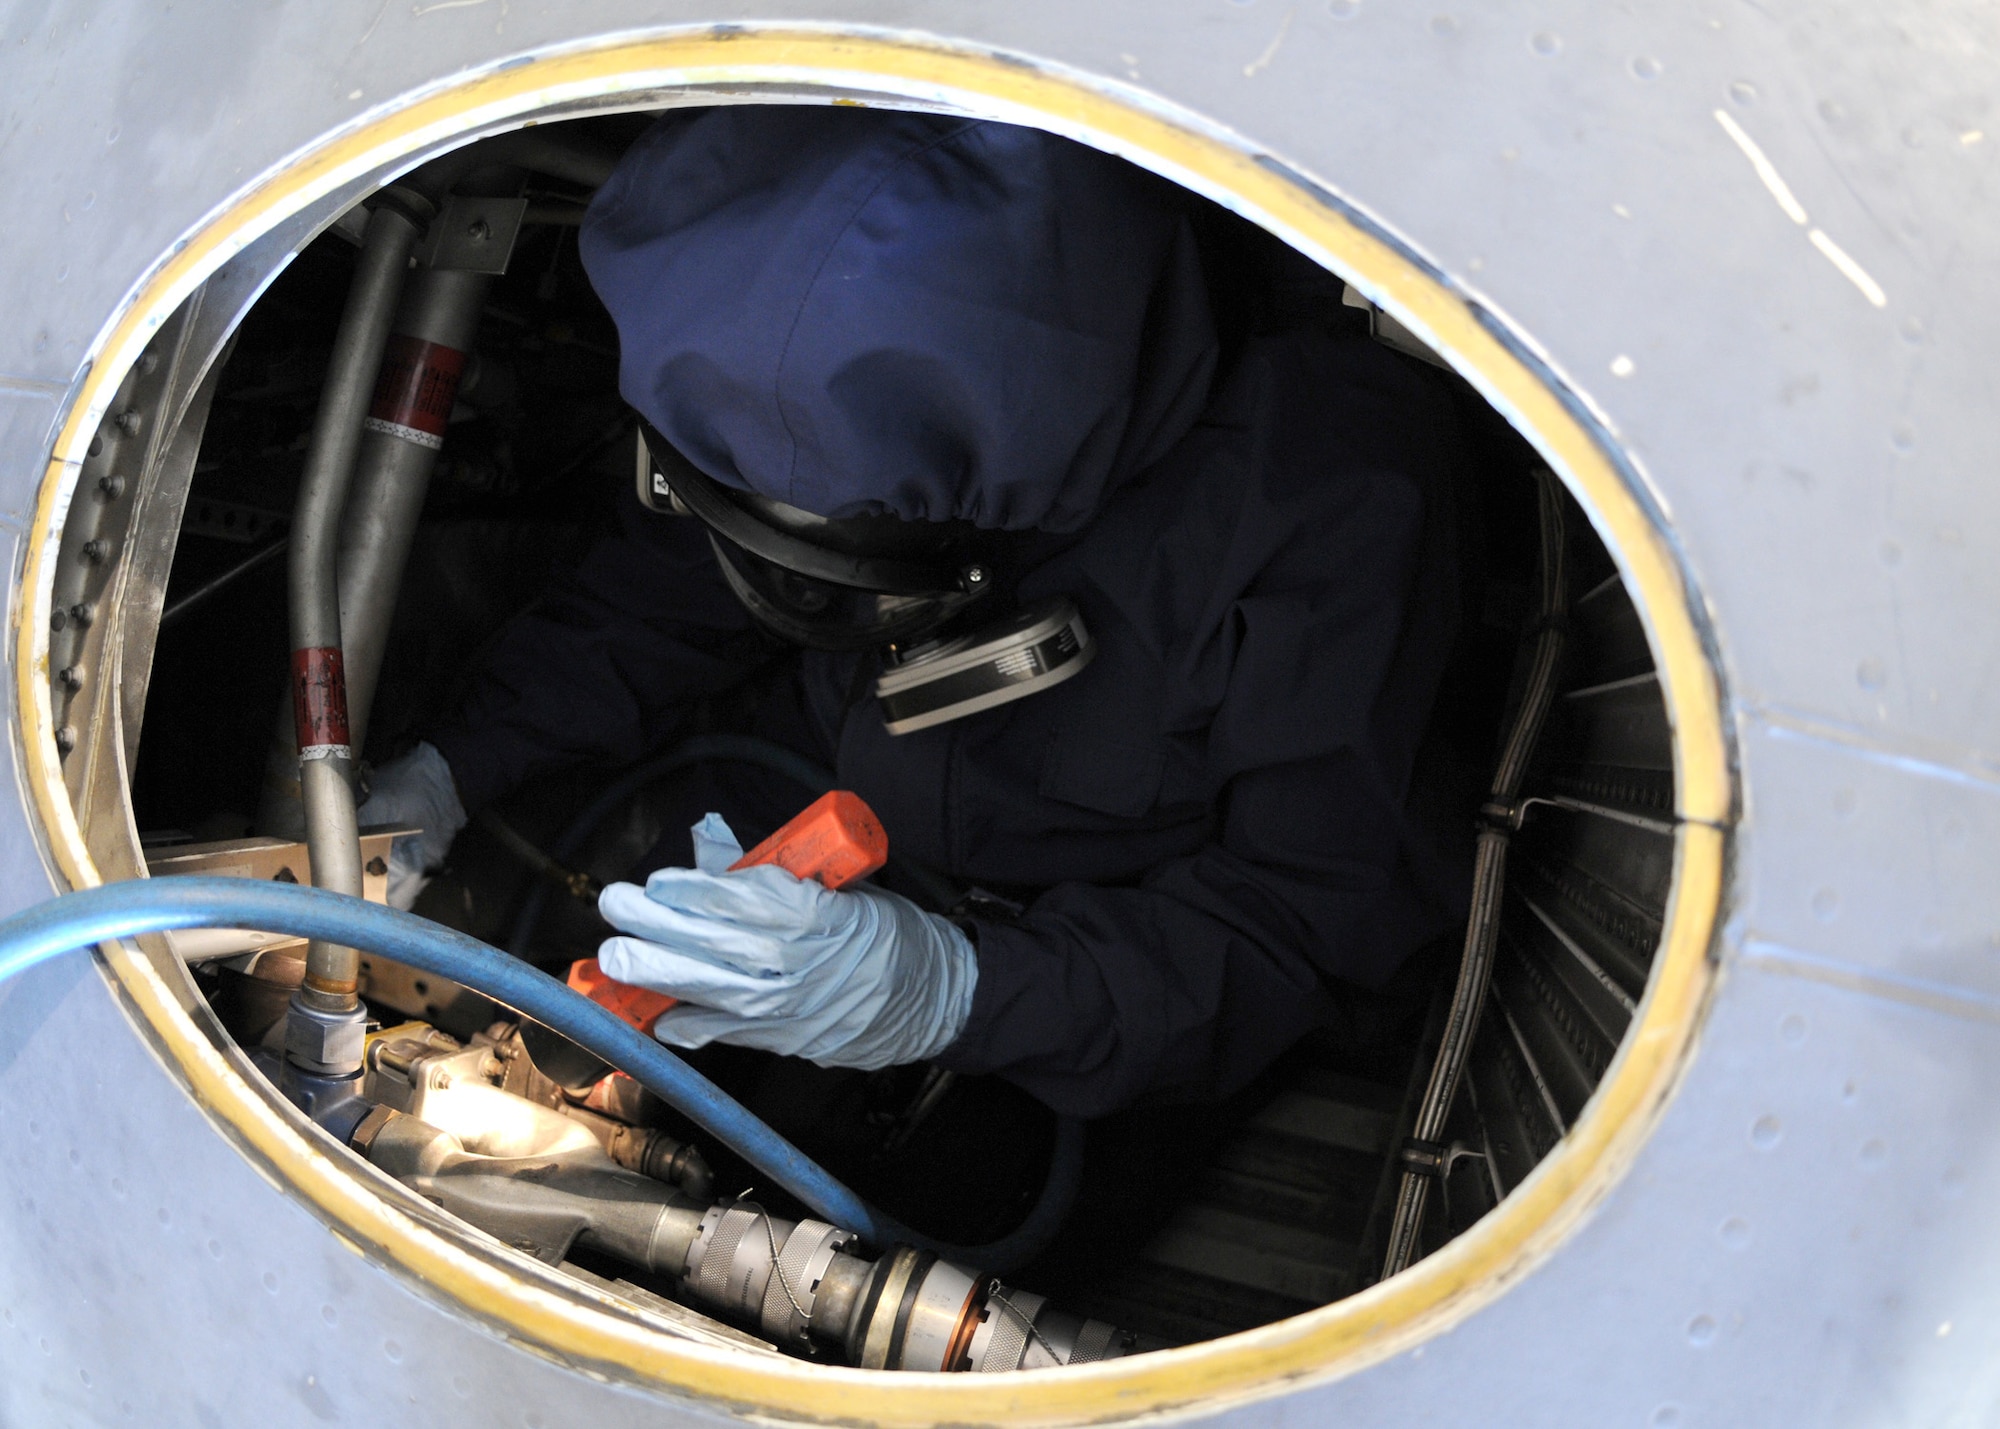 RAF MILDENHALL, England – Airman 1st Class Tracy Banks, 100th Maintenance Squadron fuels system repair apprentice performs a foreign object damage inspection inside the wing of a C-130 Sept. 24. The purpose of the inspection is to ensure all fuel areas and system components are serviceable so they are able to provide a safe, reliable, mission-ready aircraft. (U.S. Air Force photo/ Staff Sgt. Jerry Fleshman)